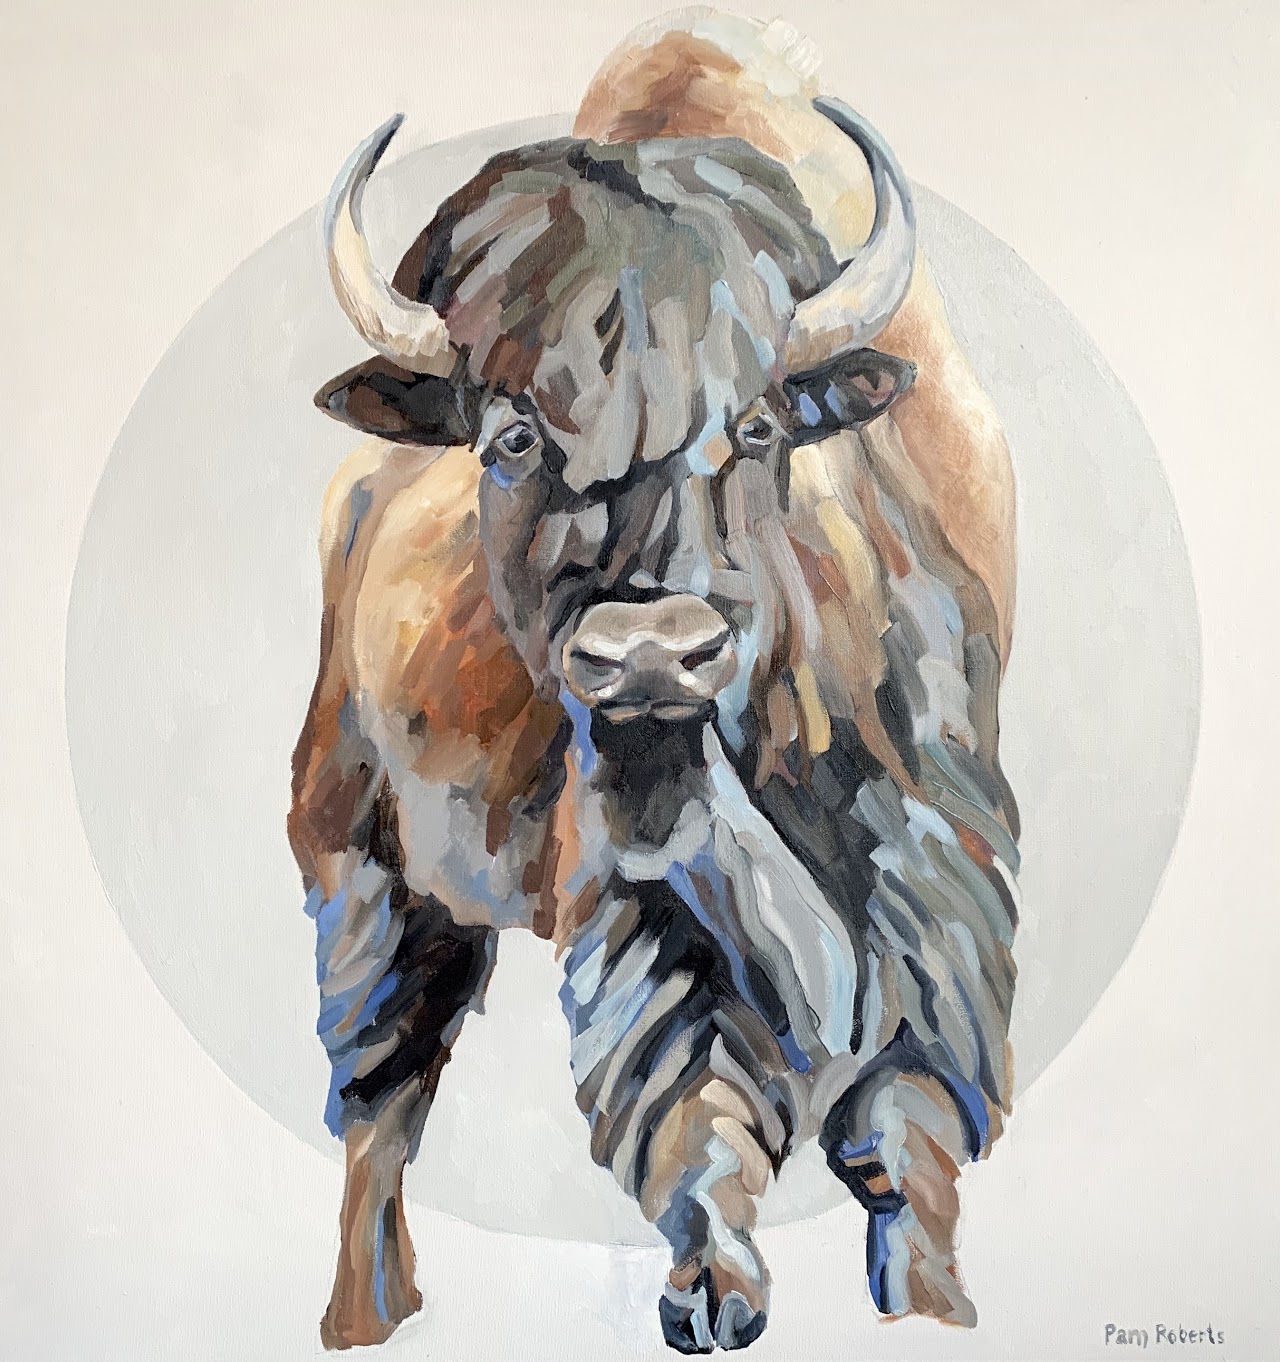 Pam Roberts painting of a bison with baby blue highlights